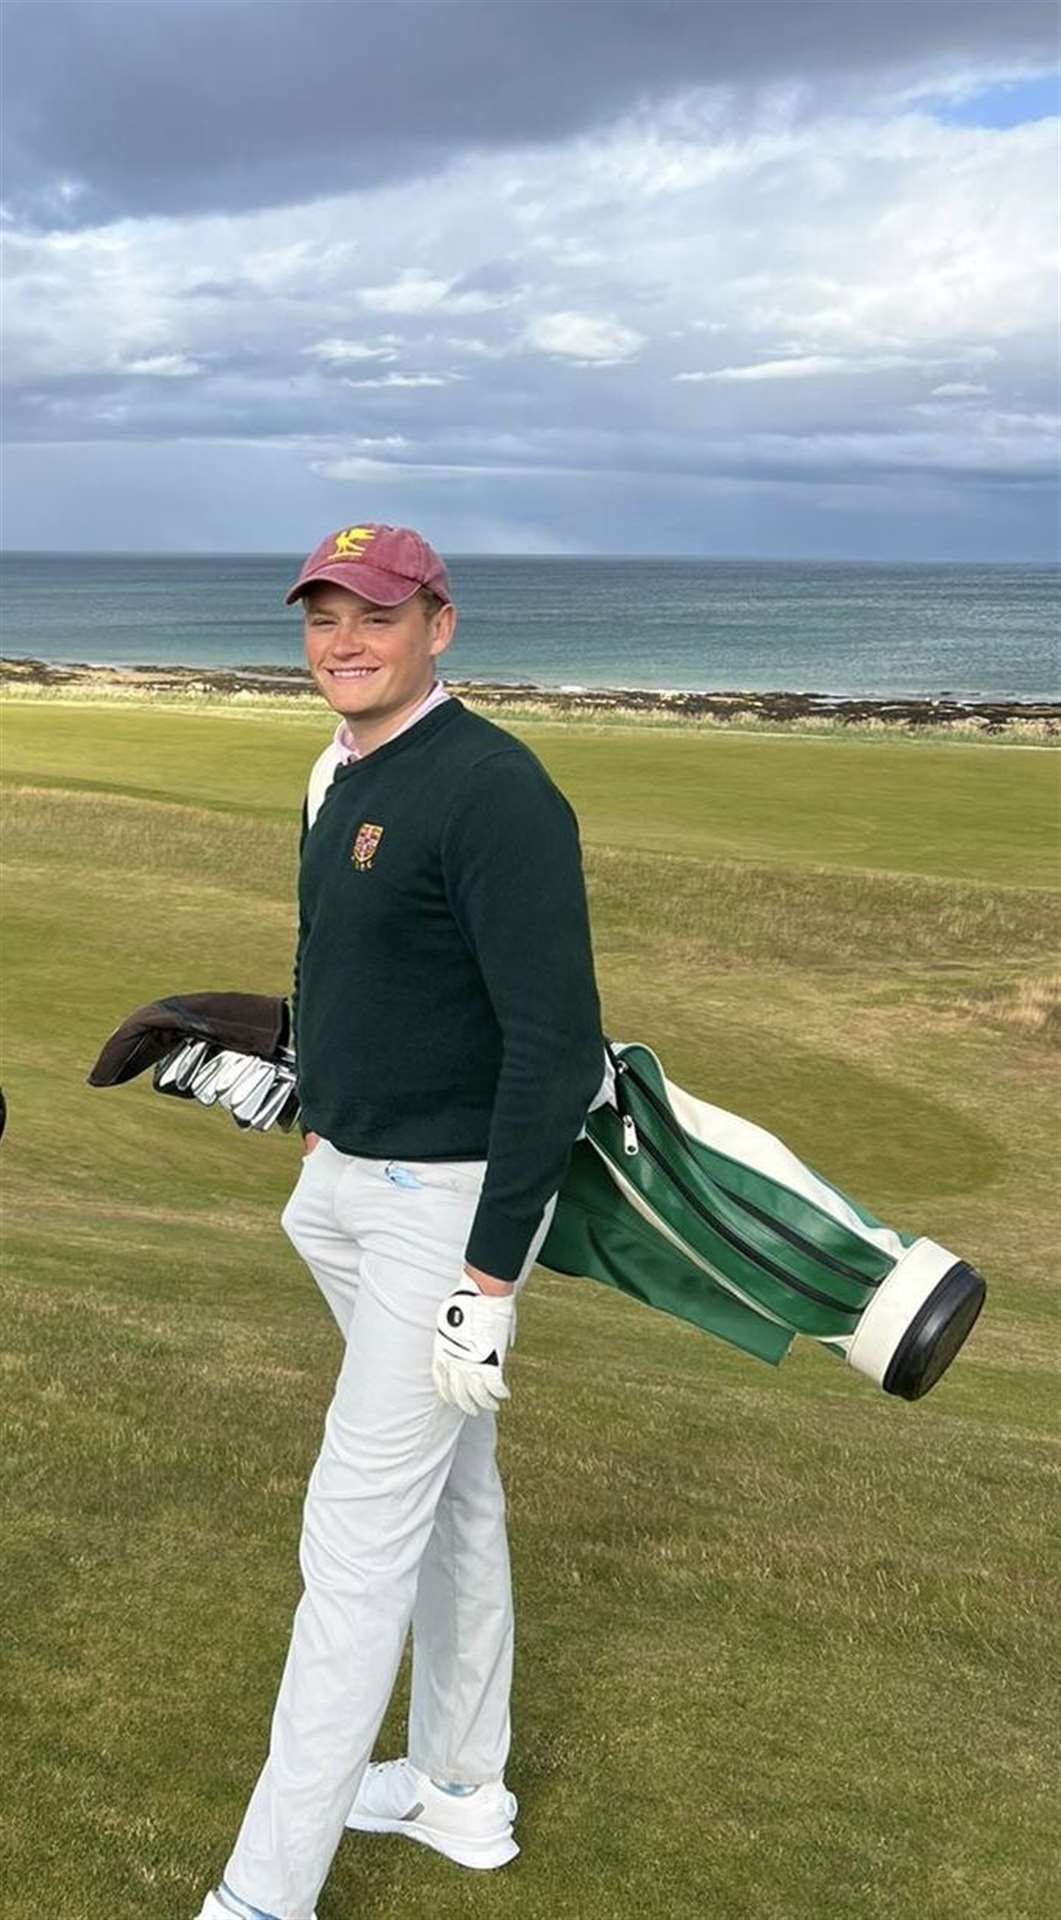 Former Cambridge golf team captain Calum MacKenzie has teed-up the historic Varsity Match with Oxford at his home course Royal Dornoch.